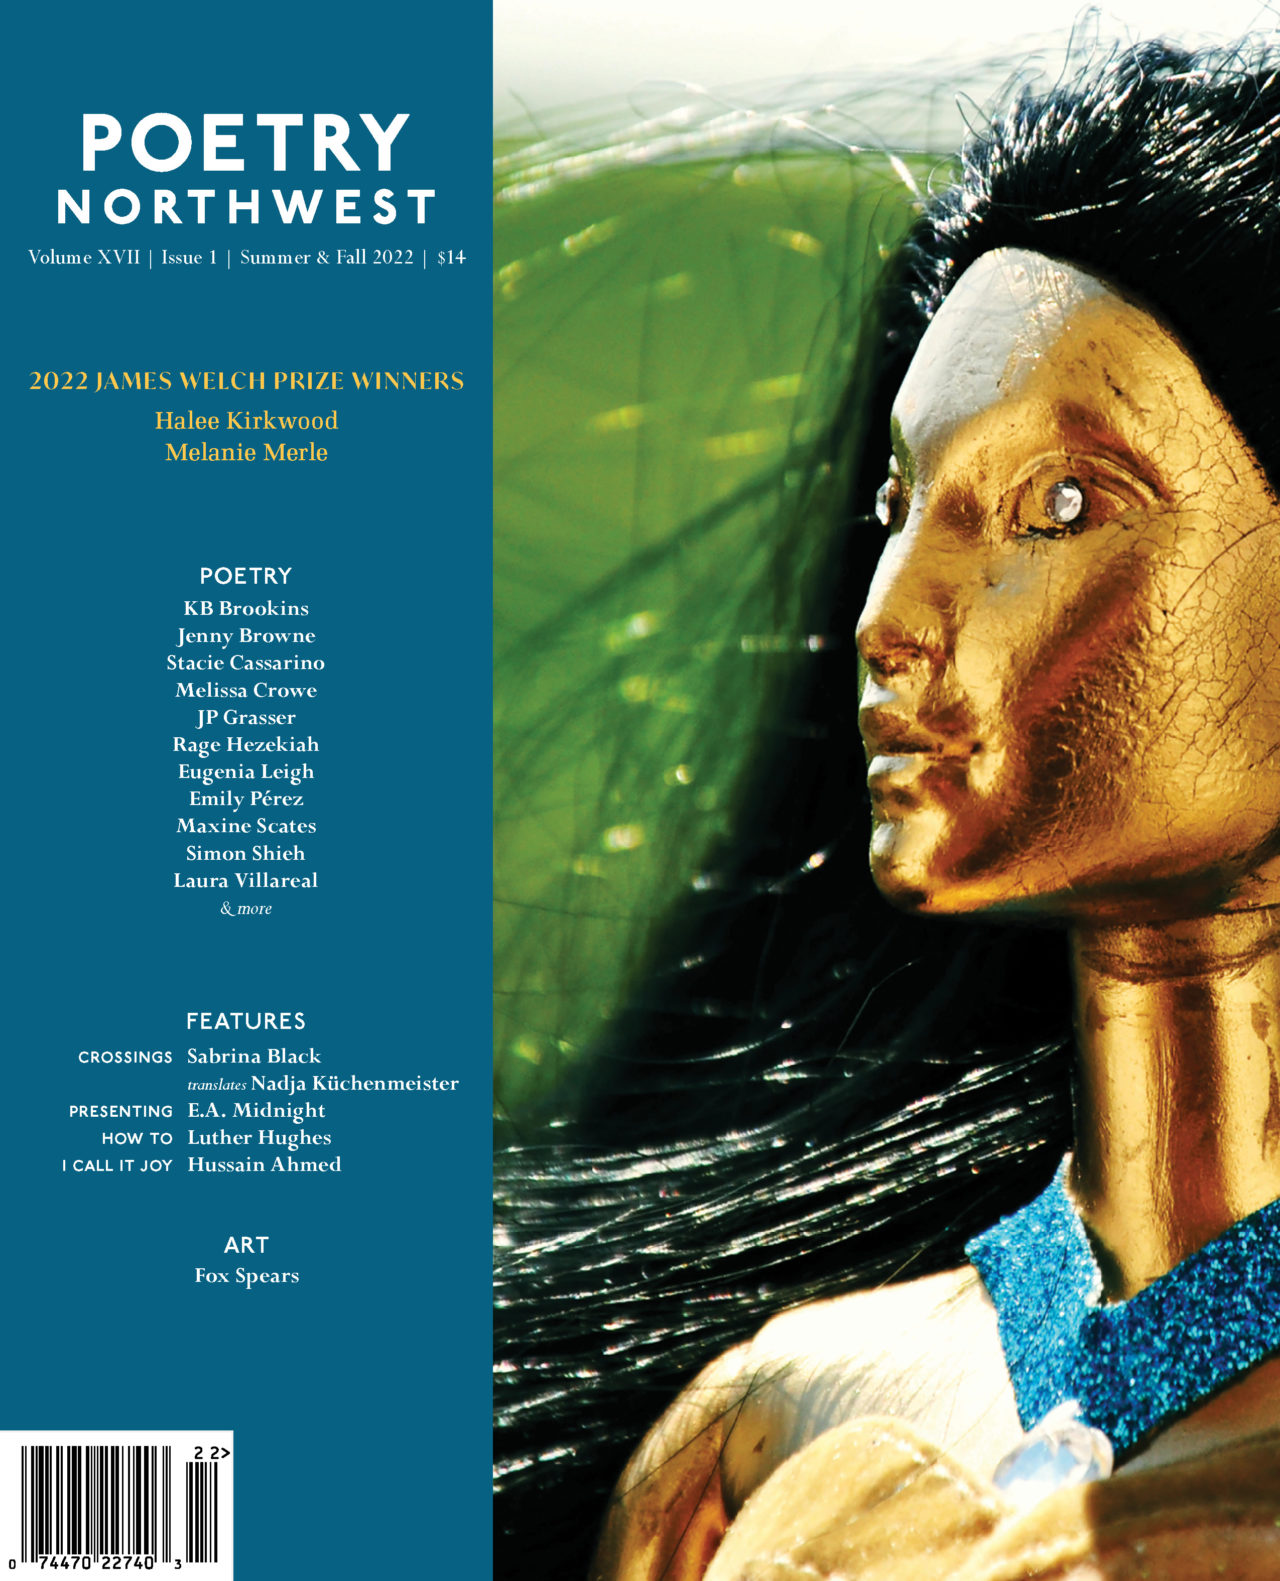 Cover of the Summer & Fall 2022 issue